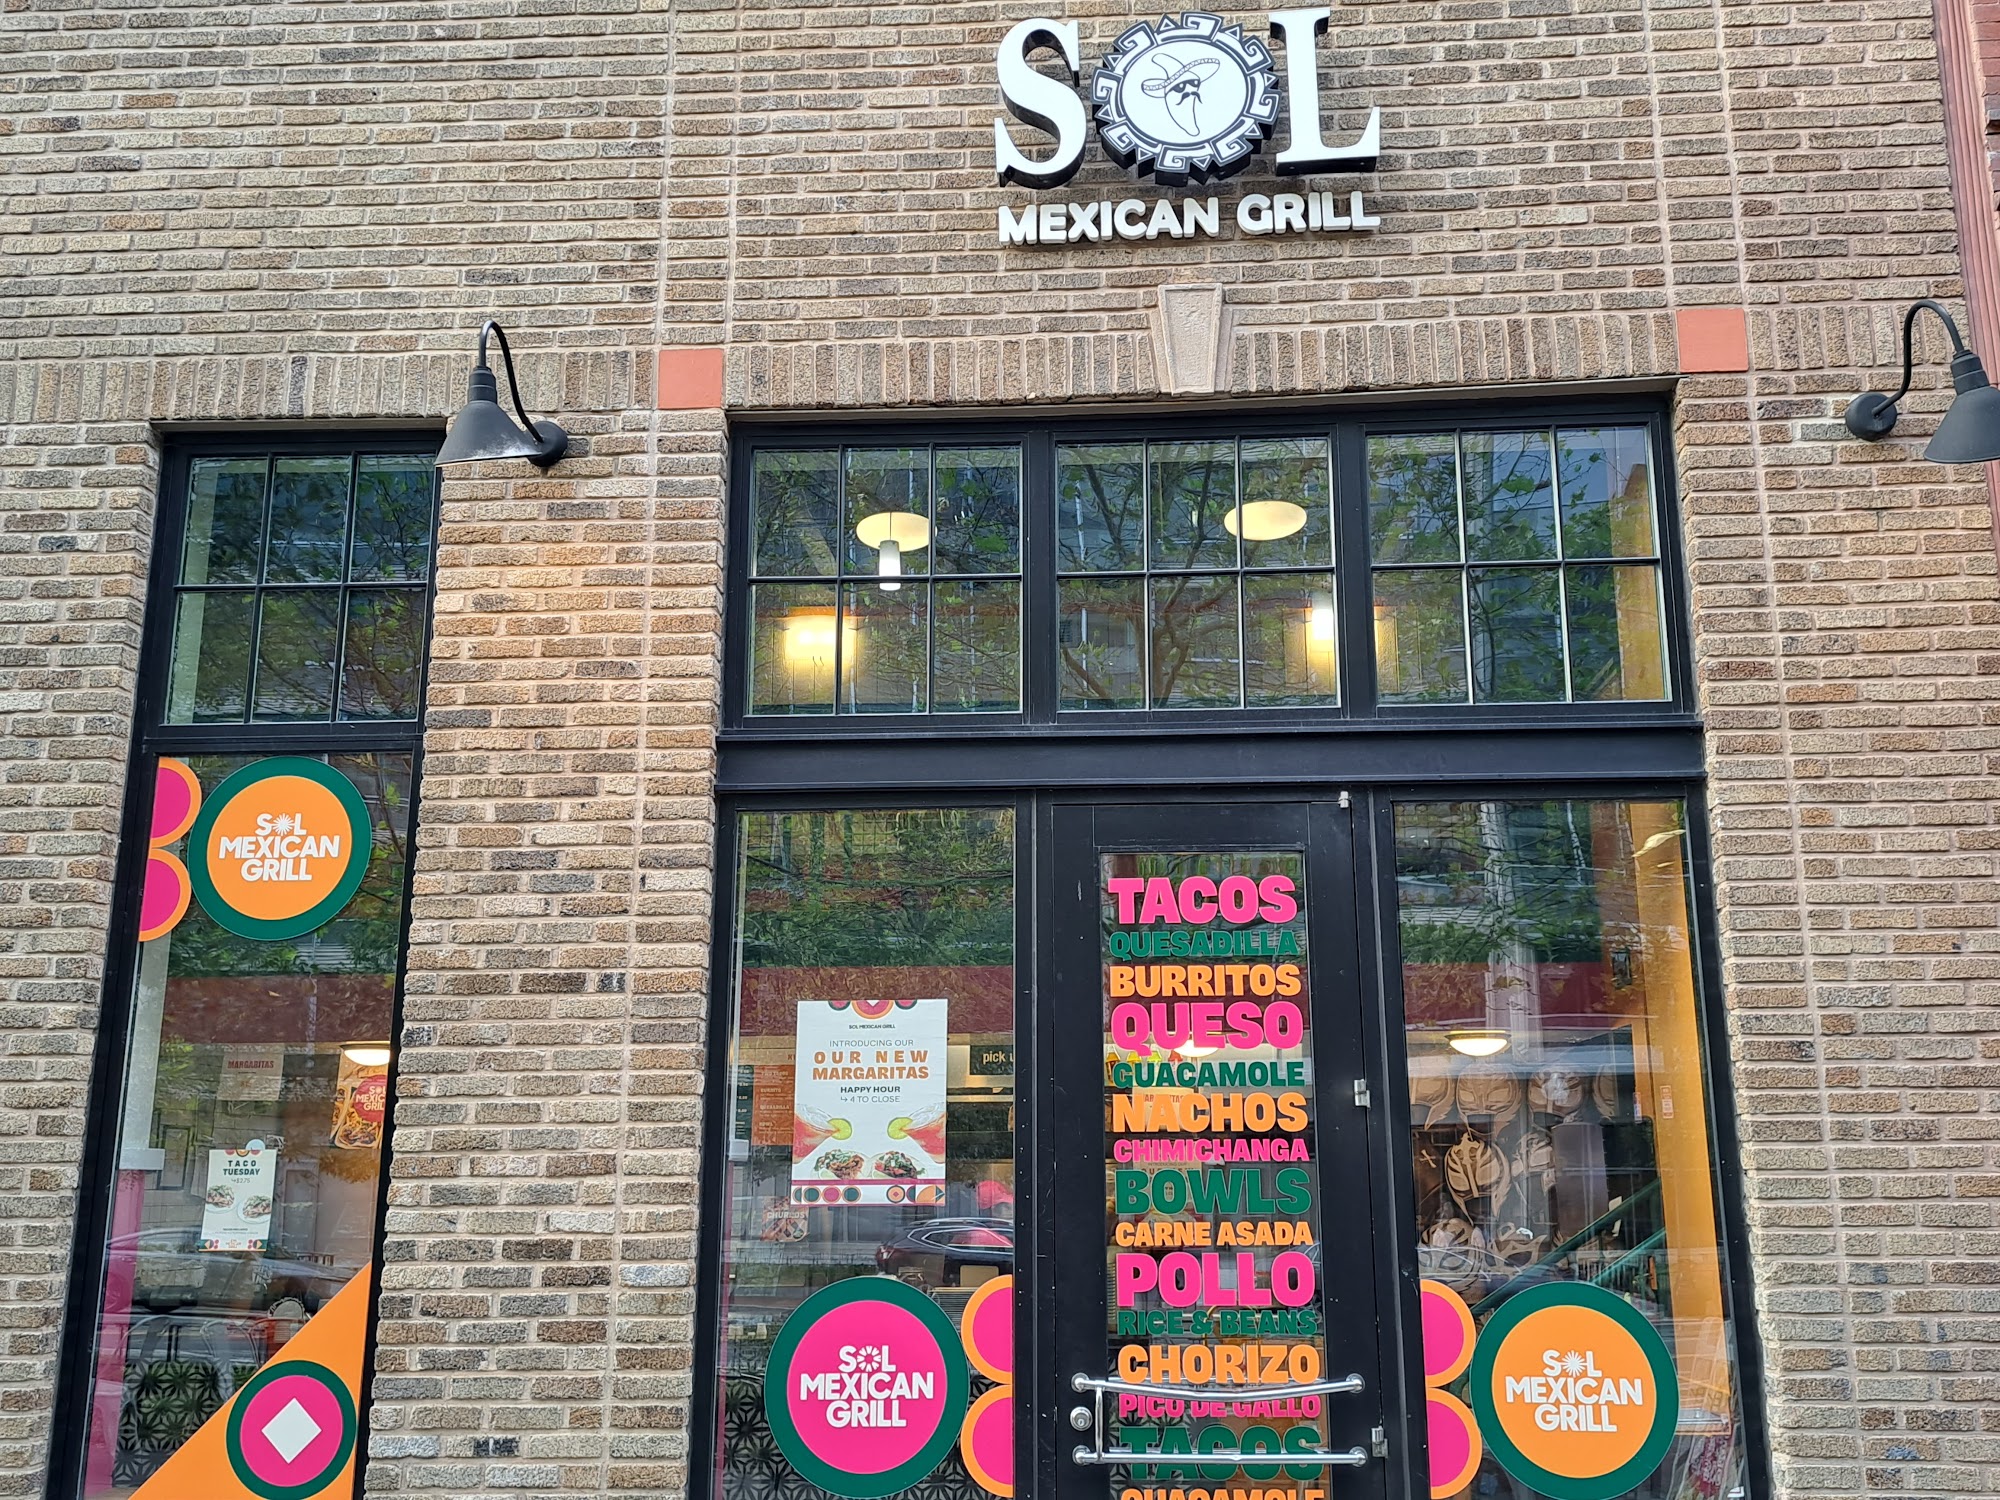 Sol mexican grill